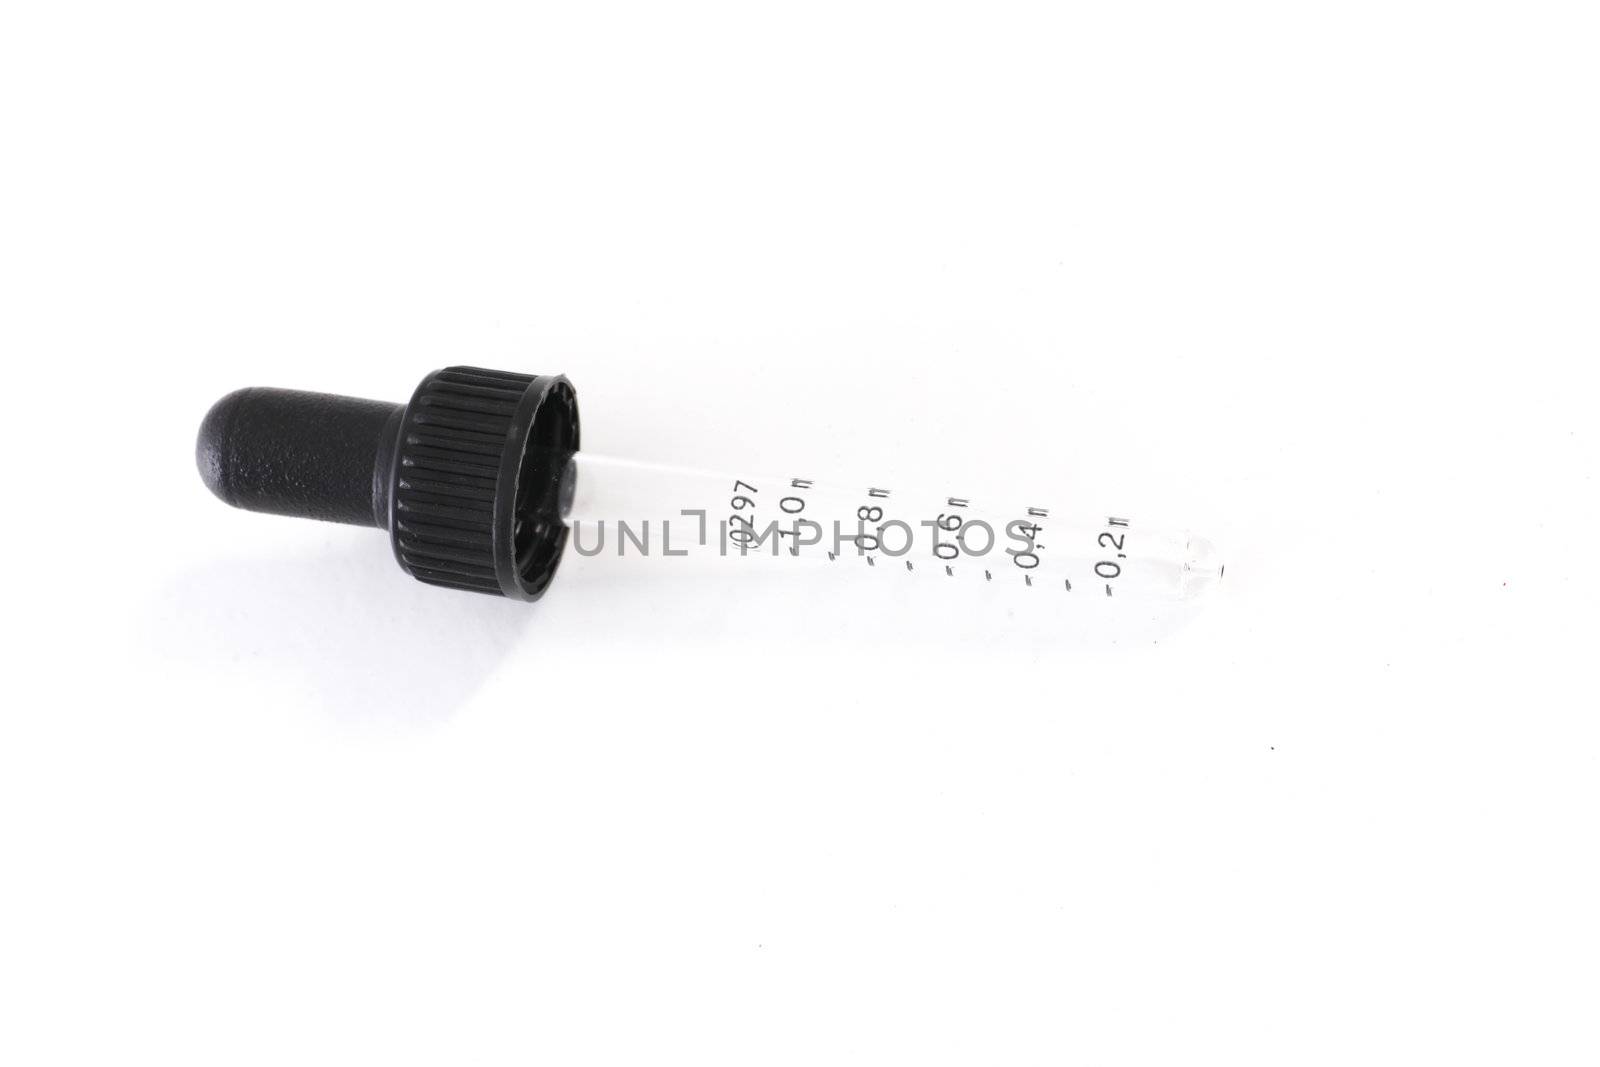 Small eye dropper dispenser with a a small graduated tube with a vacuum bulb for releasing liquid one drop at a time on a white background